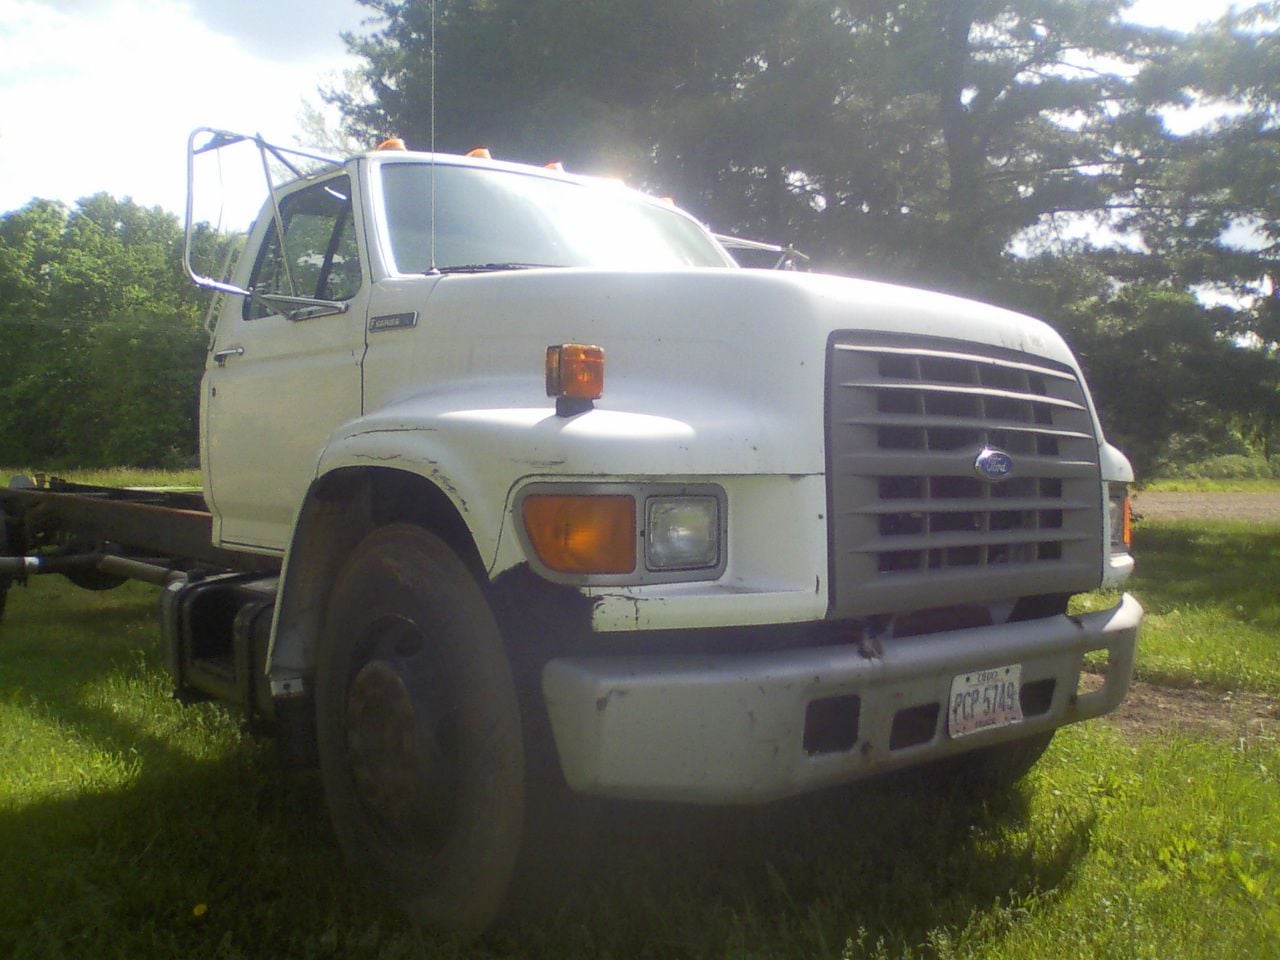 2014 Ford F-250 Super Duty - Ford chassis cab with 5.9 Cummins 12v and Allison 545 - Risingsun, OH 43457, United States